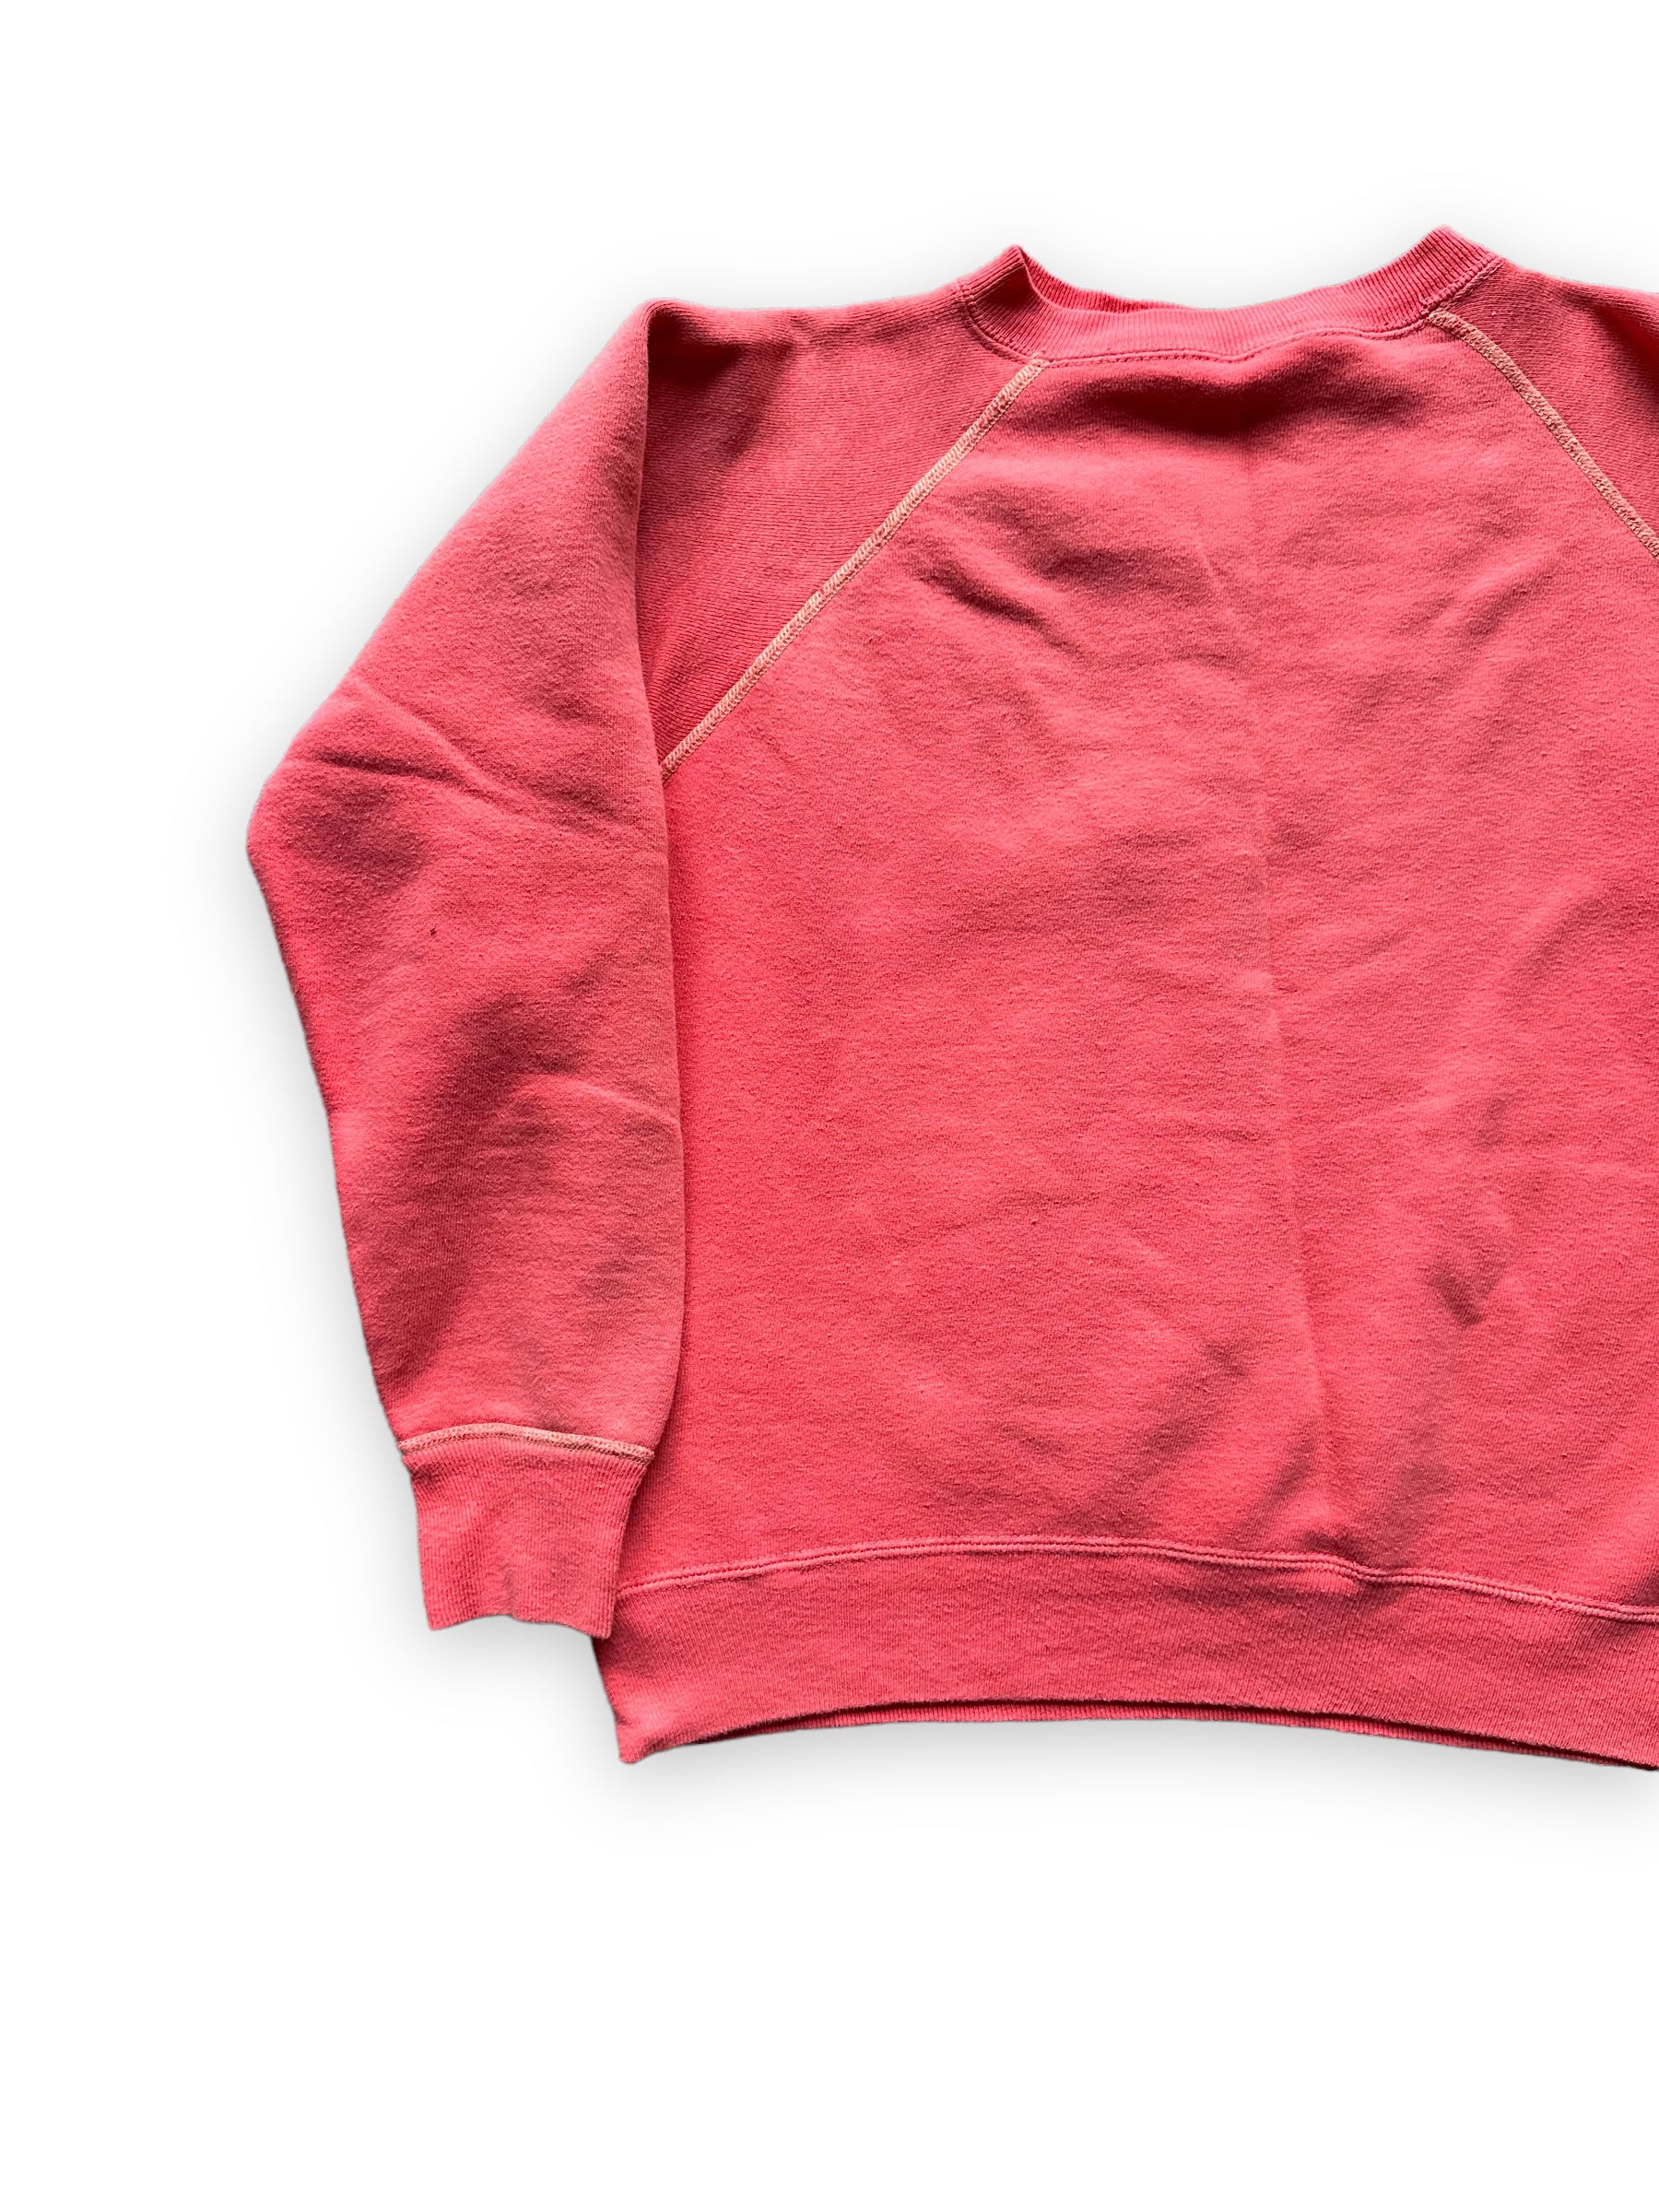 Front Right Side View of Vintage Faded Red Crewneck Sweatshirt | Vintage Crewneck Sweatshirt Seattle | Barn Owl Vintage Clothing